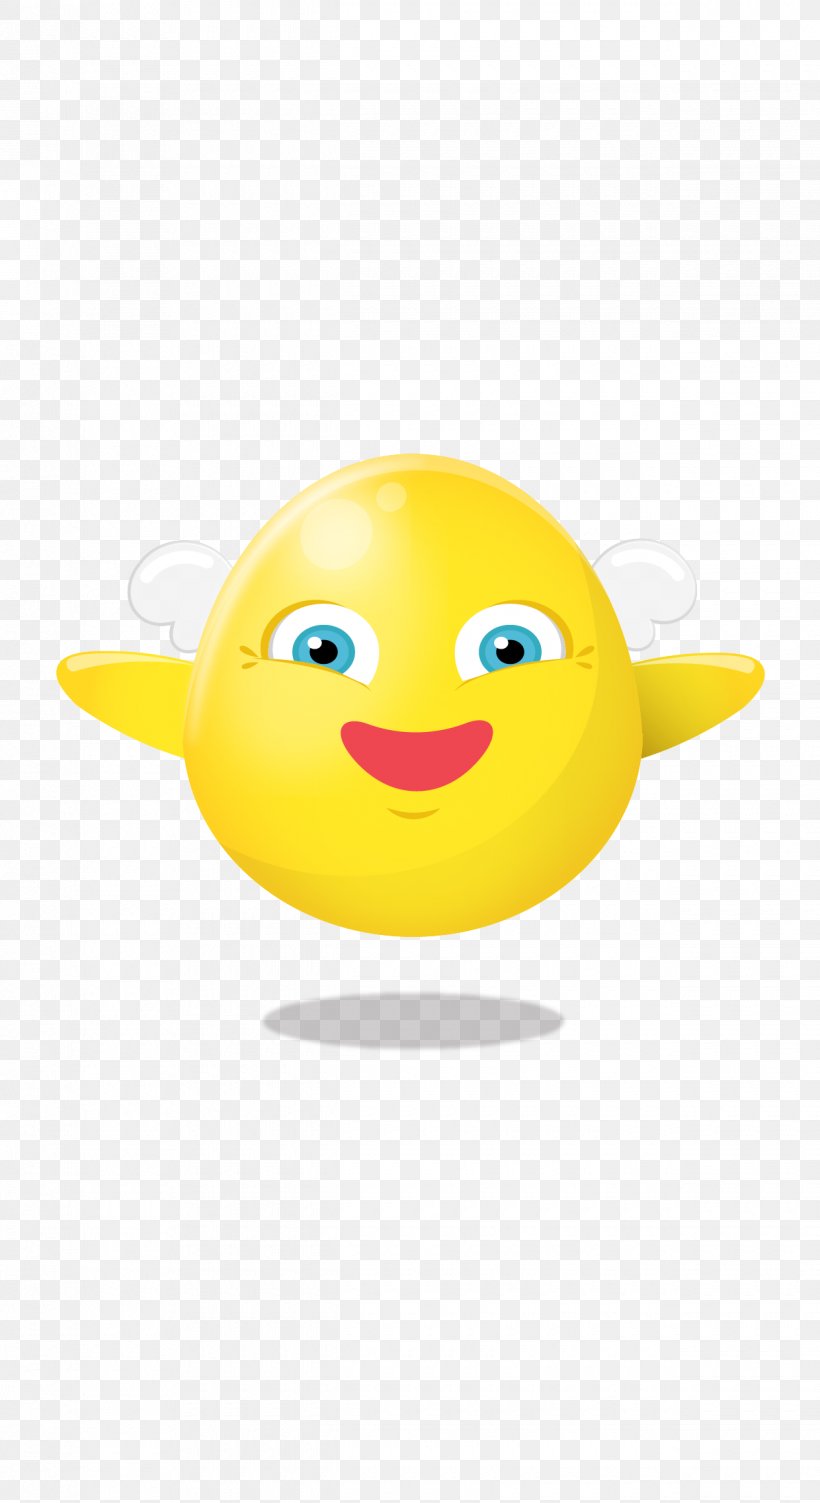 Smiley Product Design Cartoon, PNG, 1240x2273px, Smiley, Cartoon, Emoticon, Smile, Yellow Download Free